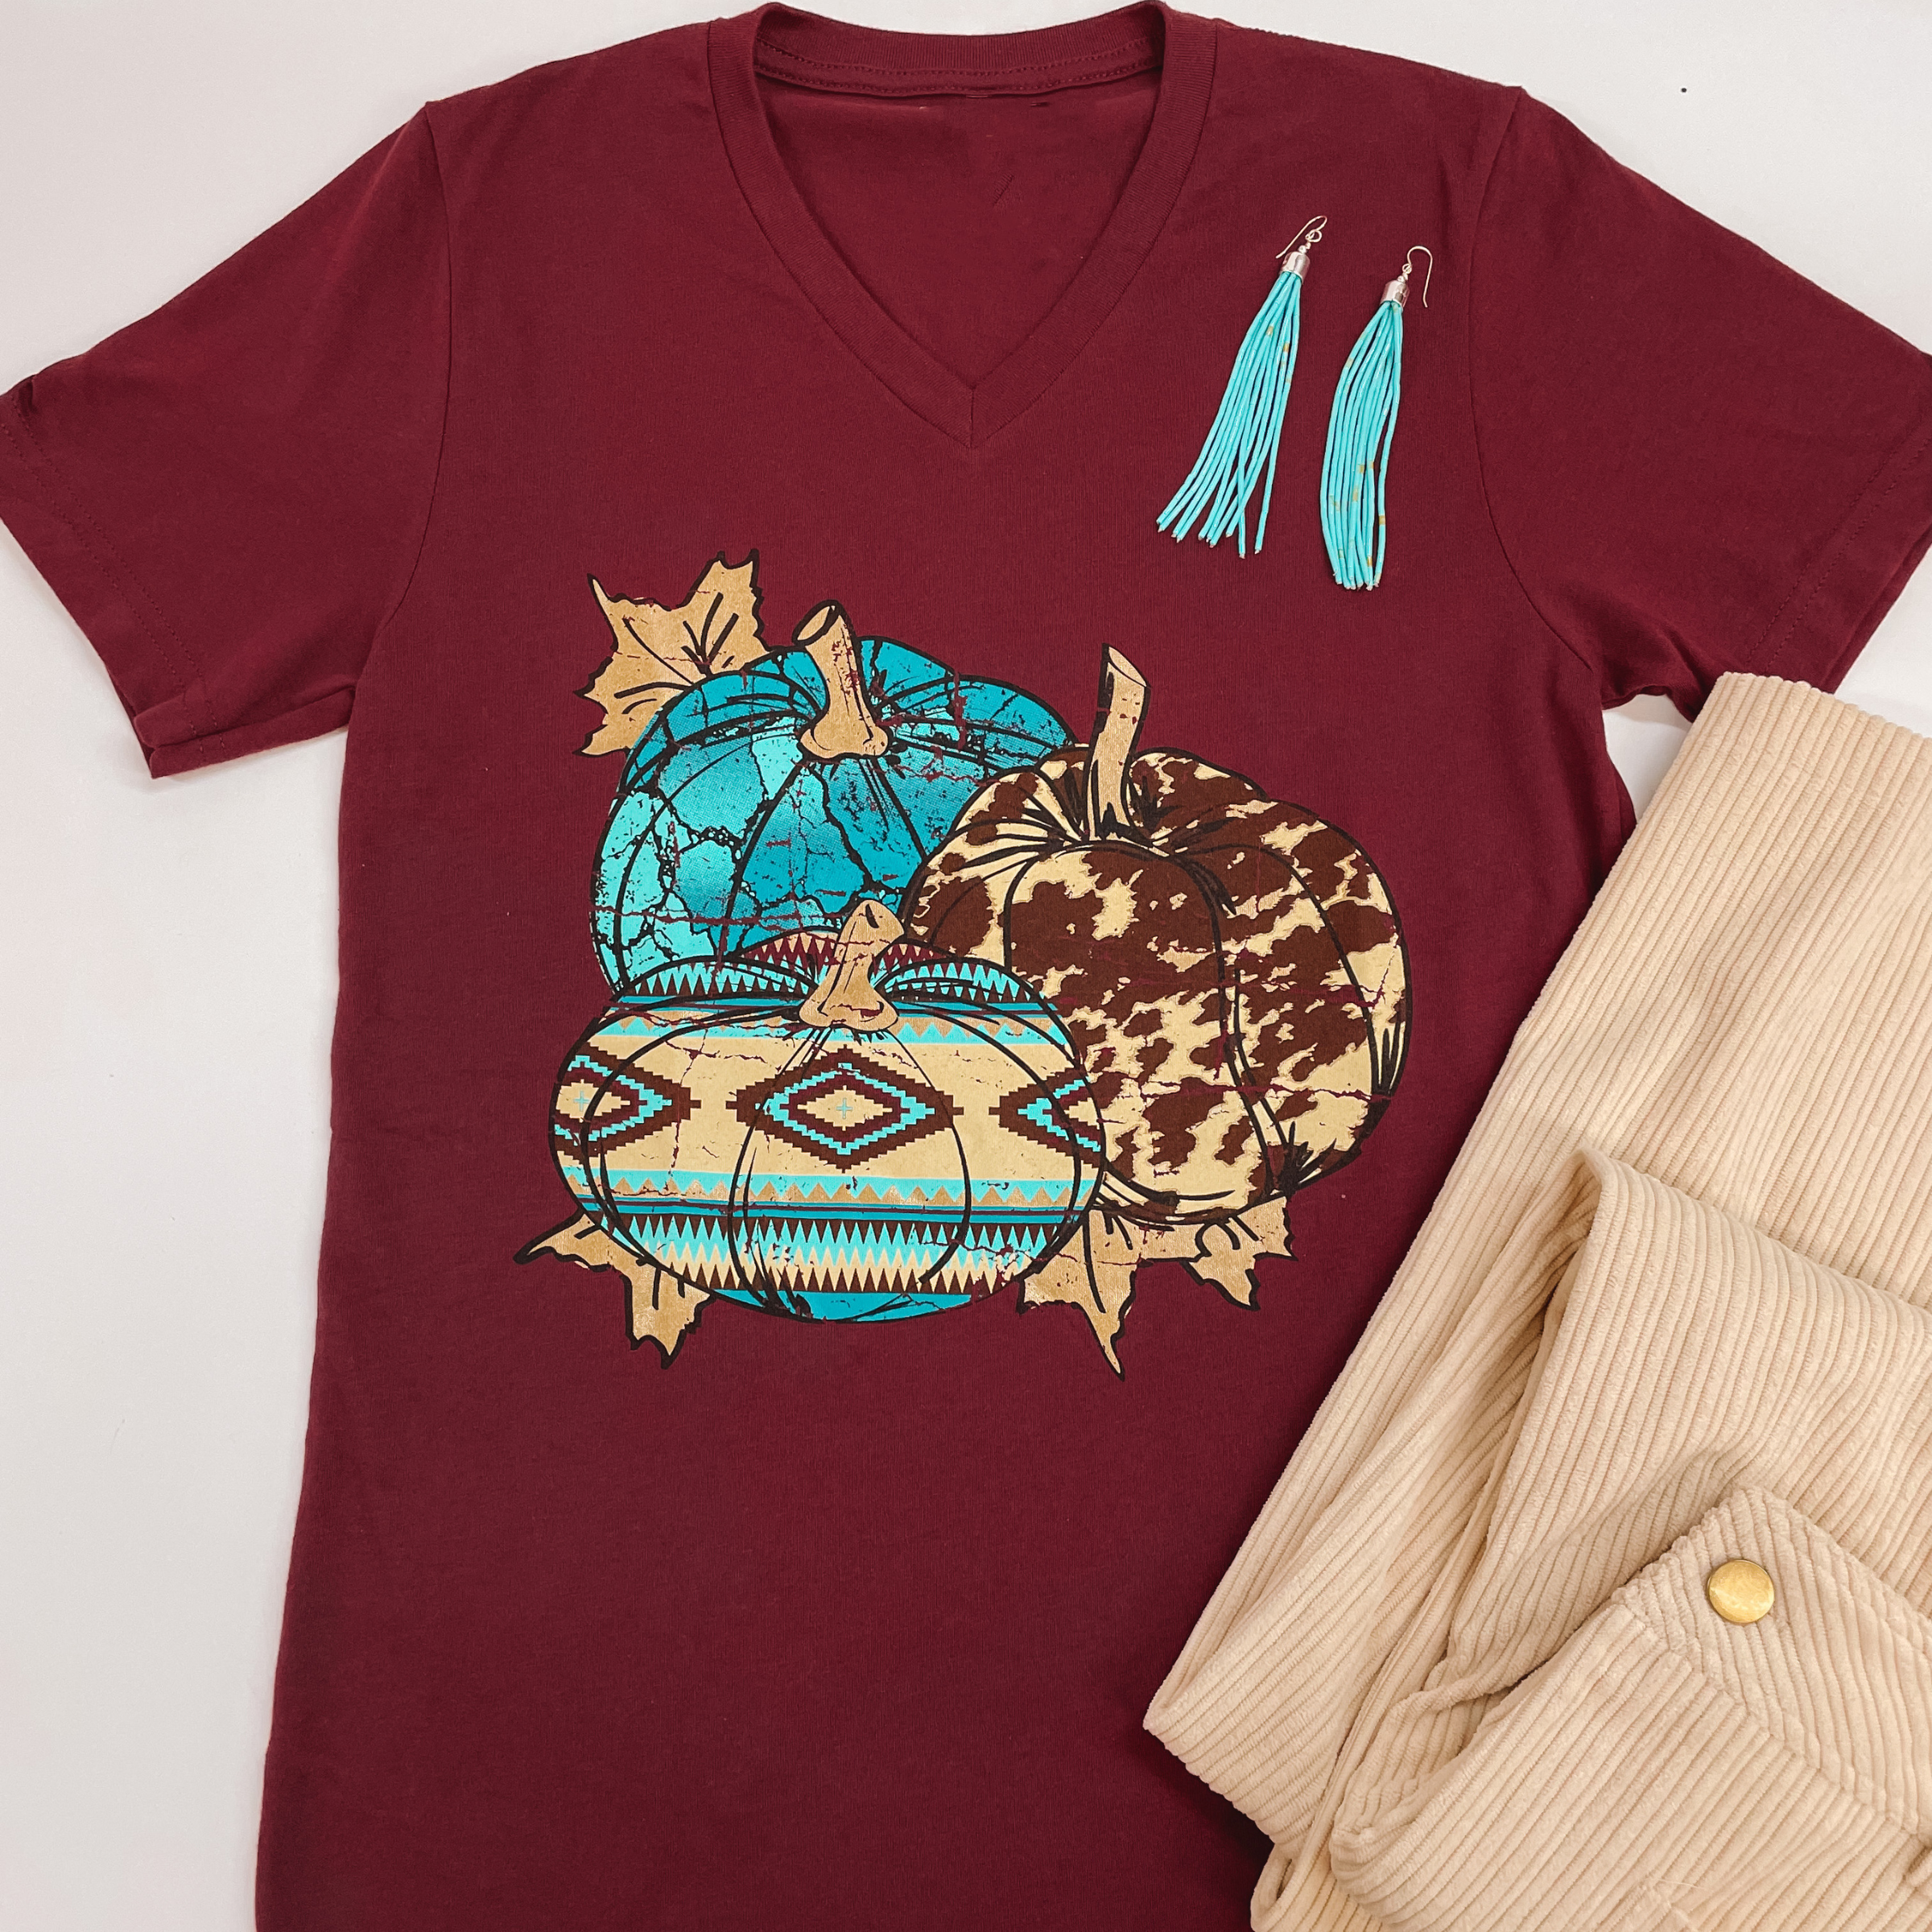 A short sleeve graphic tee with a v neckline and a graphic of a cow print pumpkin, turquoise pumpkin, and Aztec print pumpkin. Pictured on a white background with beige corduroy pants and turquoise earrings.